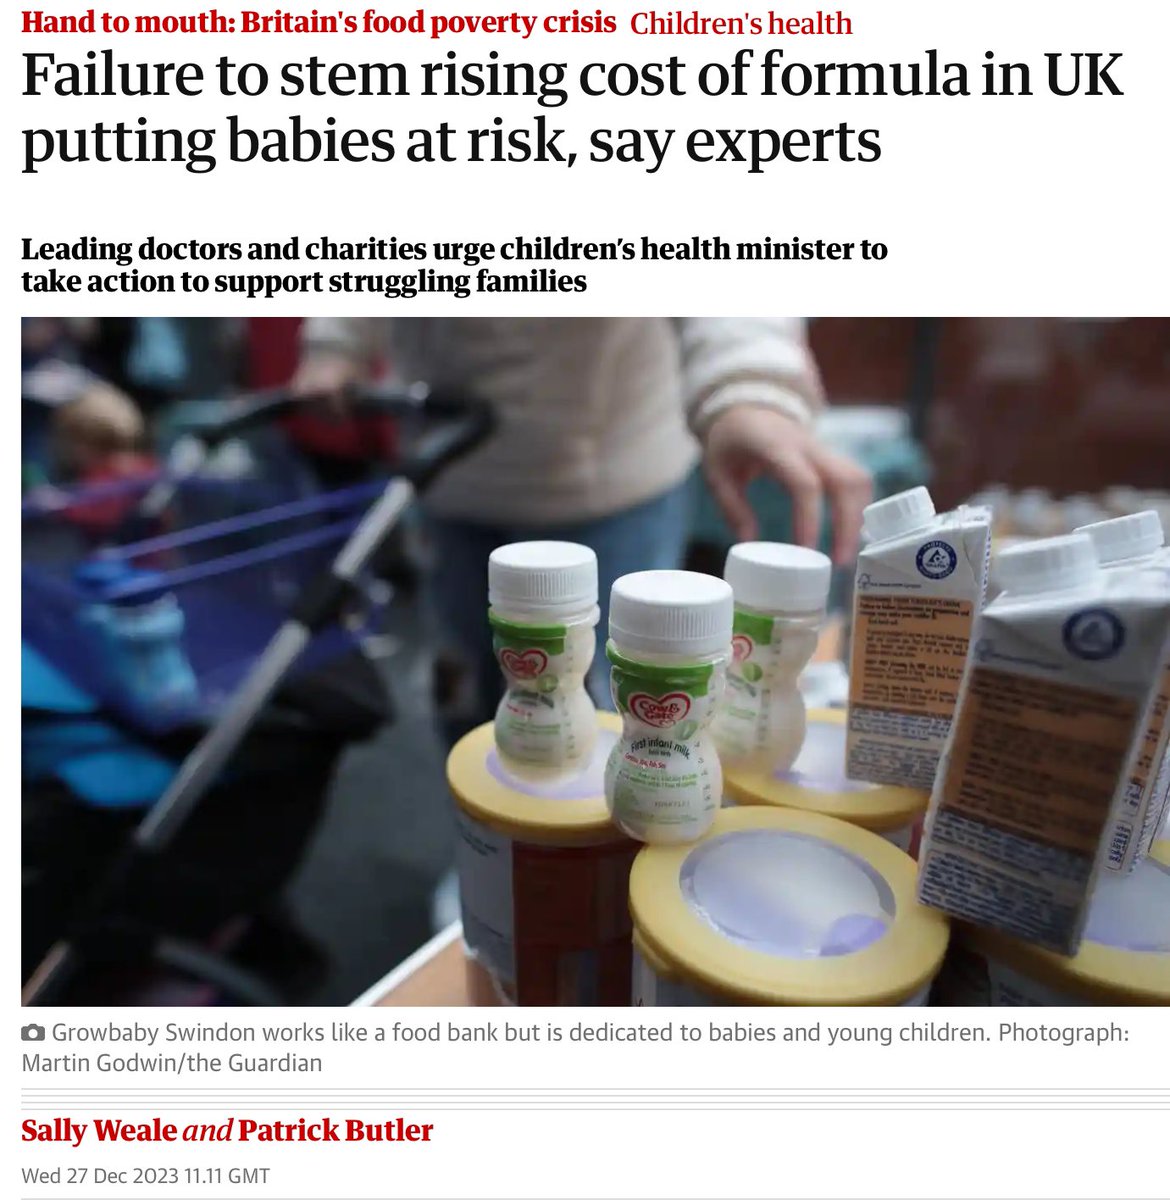 Health of many babies at risk as milk formula firms raise price 25% in two years and low income families who can’t afford £14.50 a week are reduced to foraging for half-used packets online bit.ly/3twFC1d